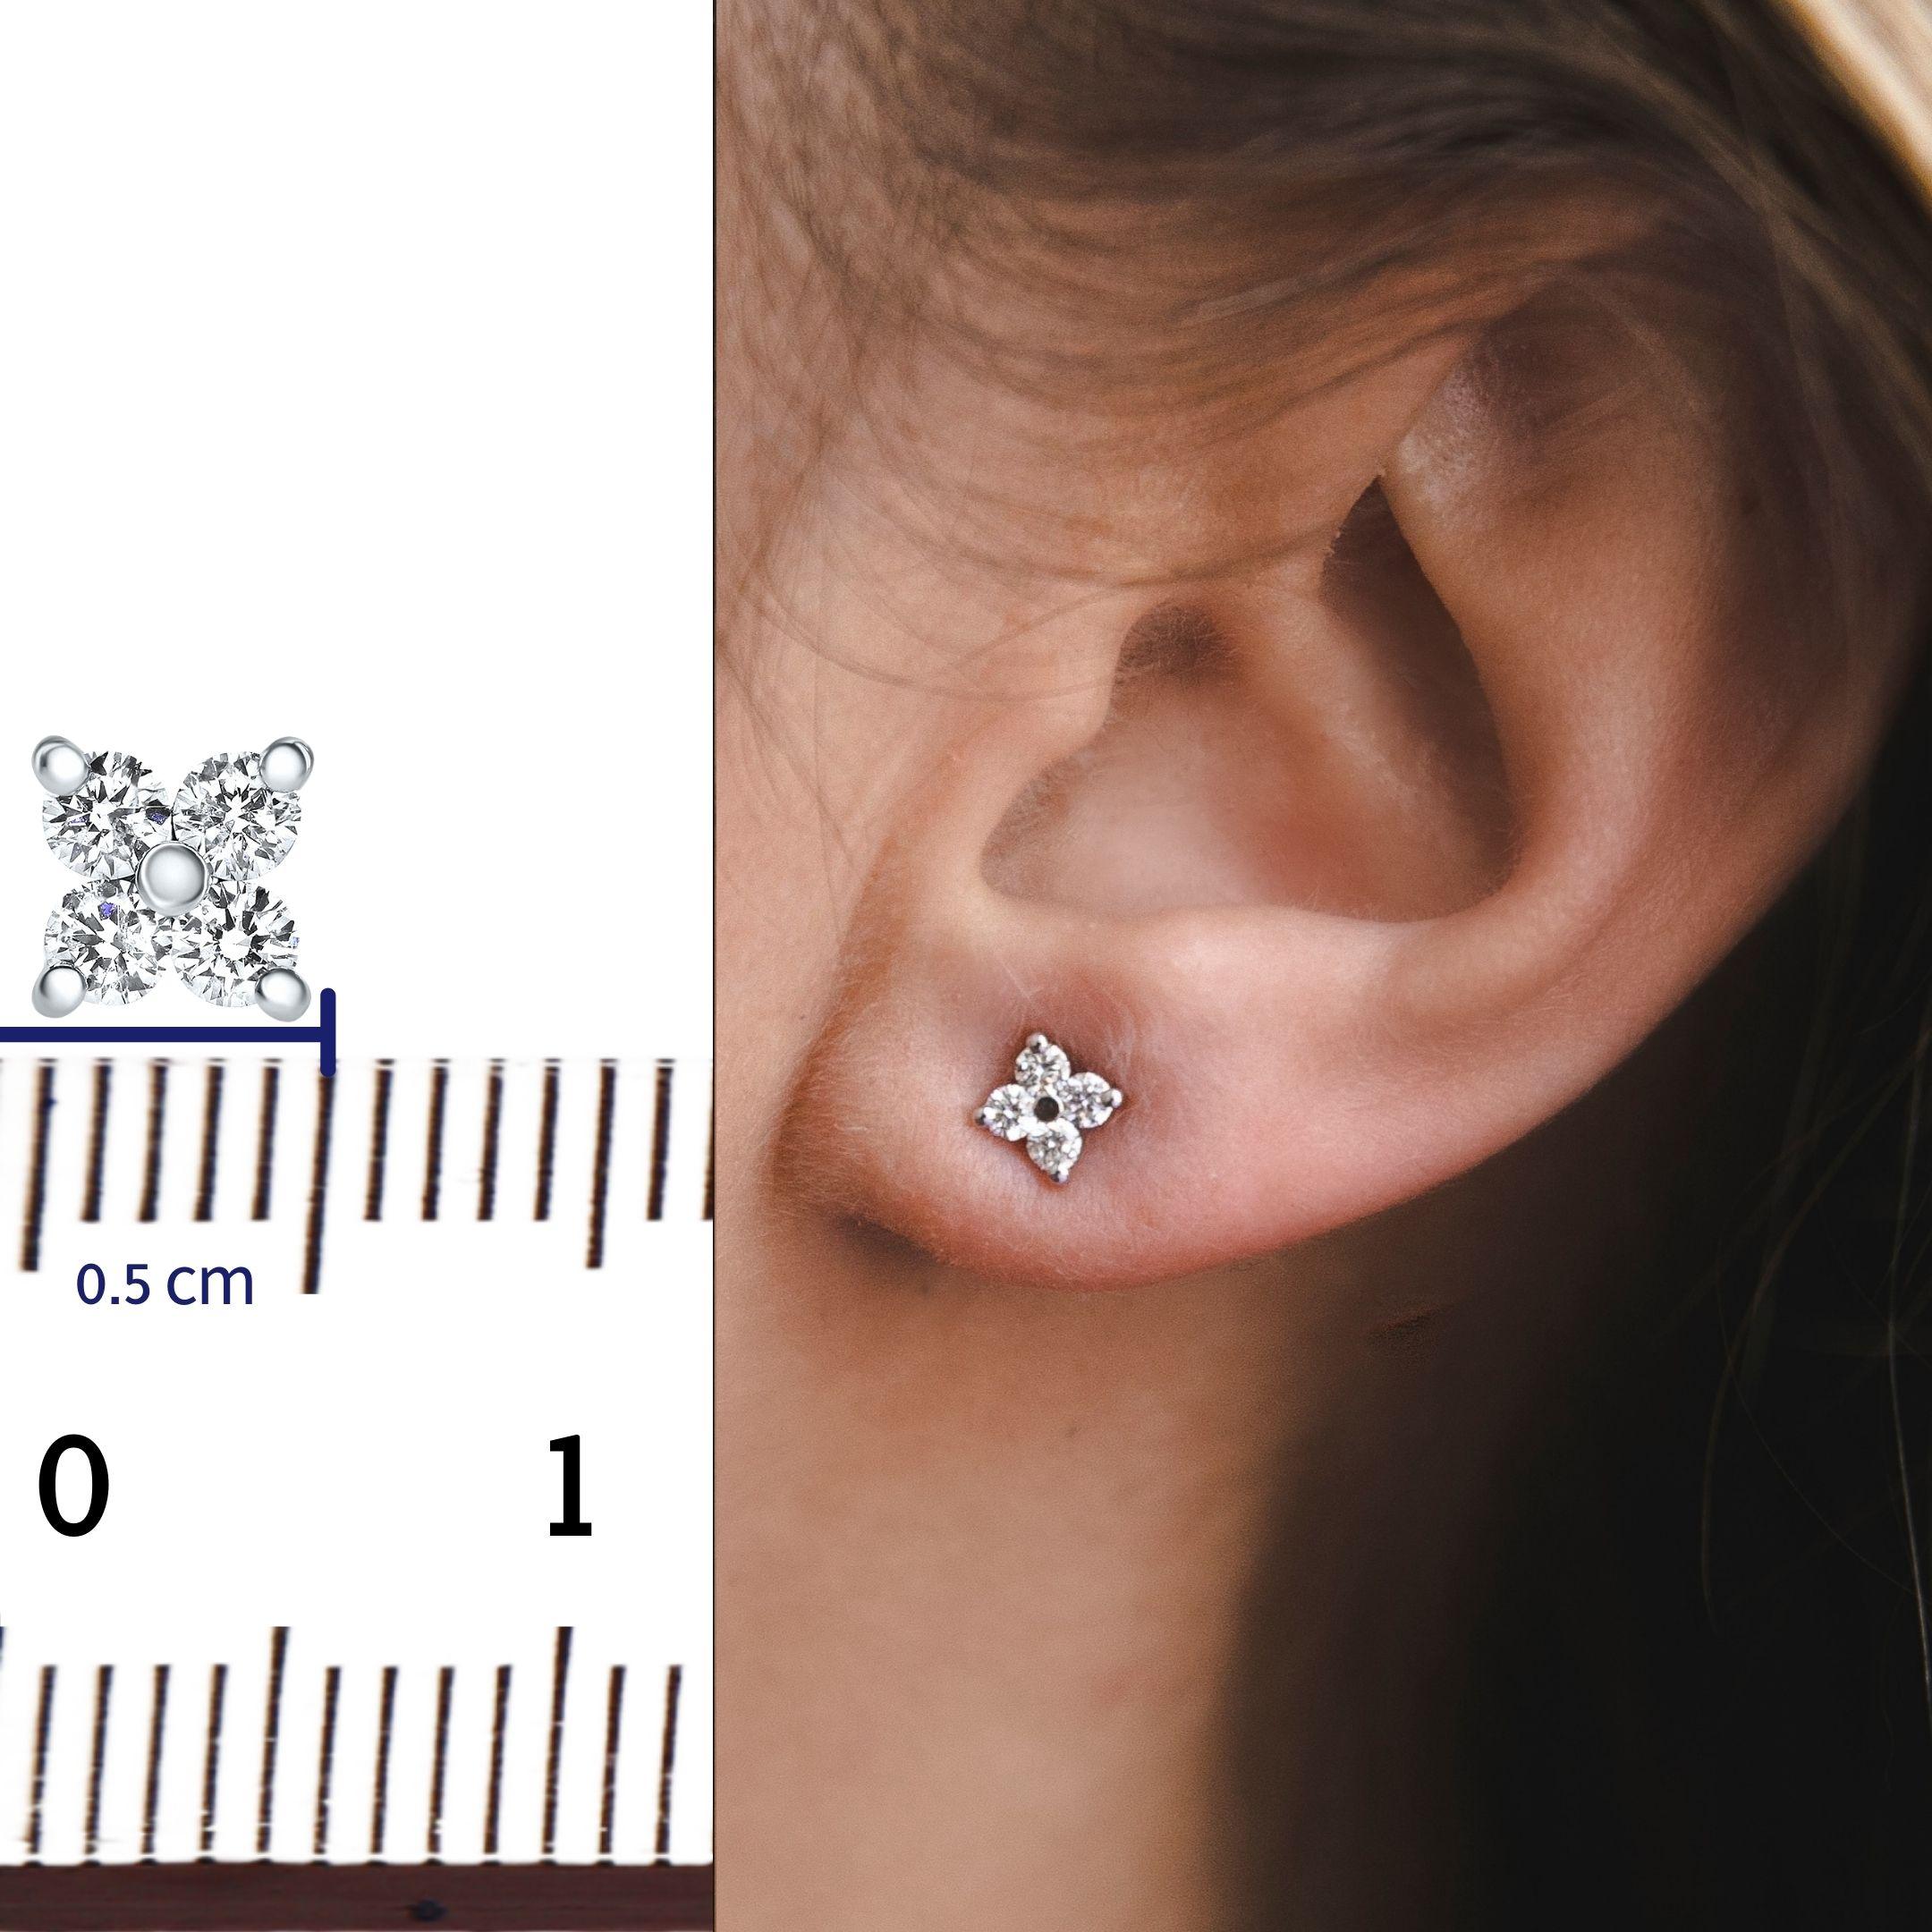 0.32 Carat Diamond Flower Petal Stud Earrings in 14K White Gold, Shlomit Rogel

Sparkle away in these classic diamond flower petal shape stud earrings. These beautiful earrings are crafted from 14k solid white gold and embedded with 8 genuine white